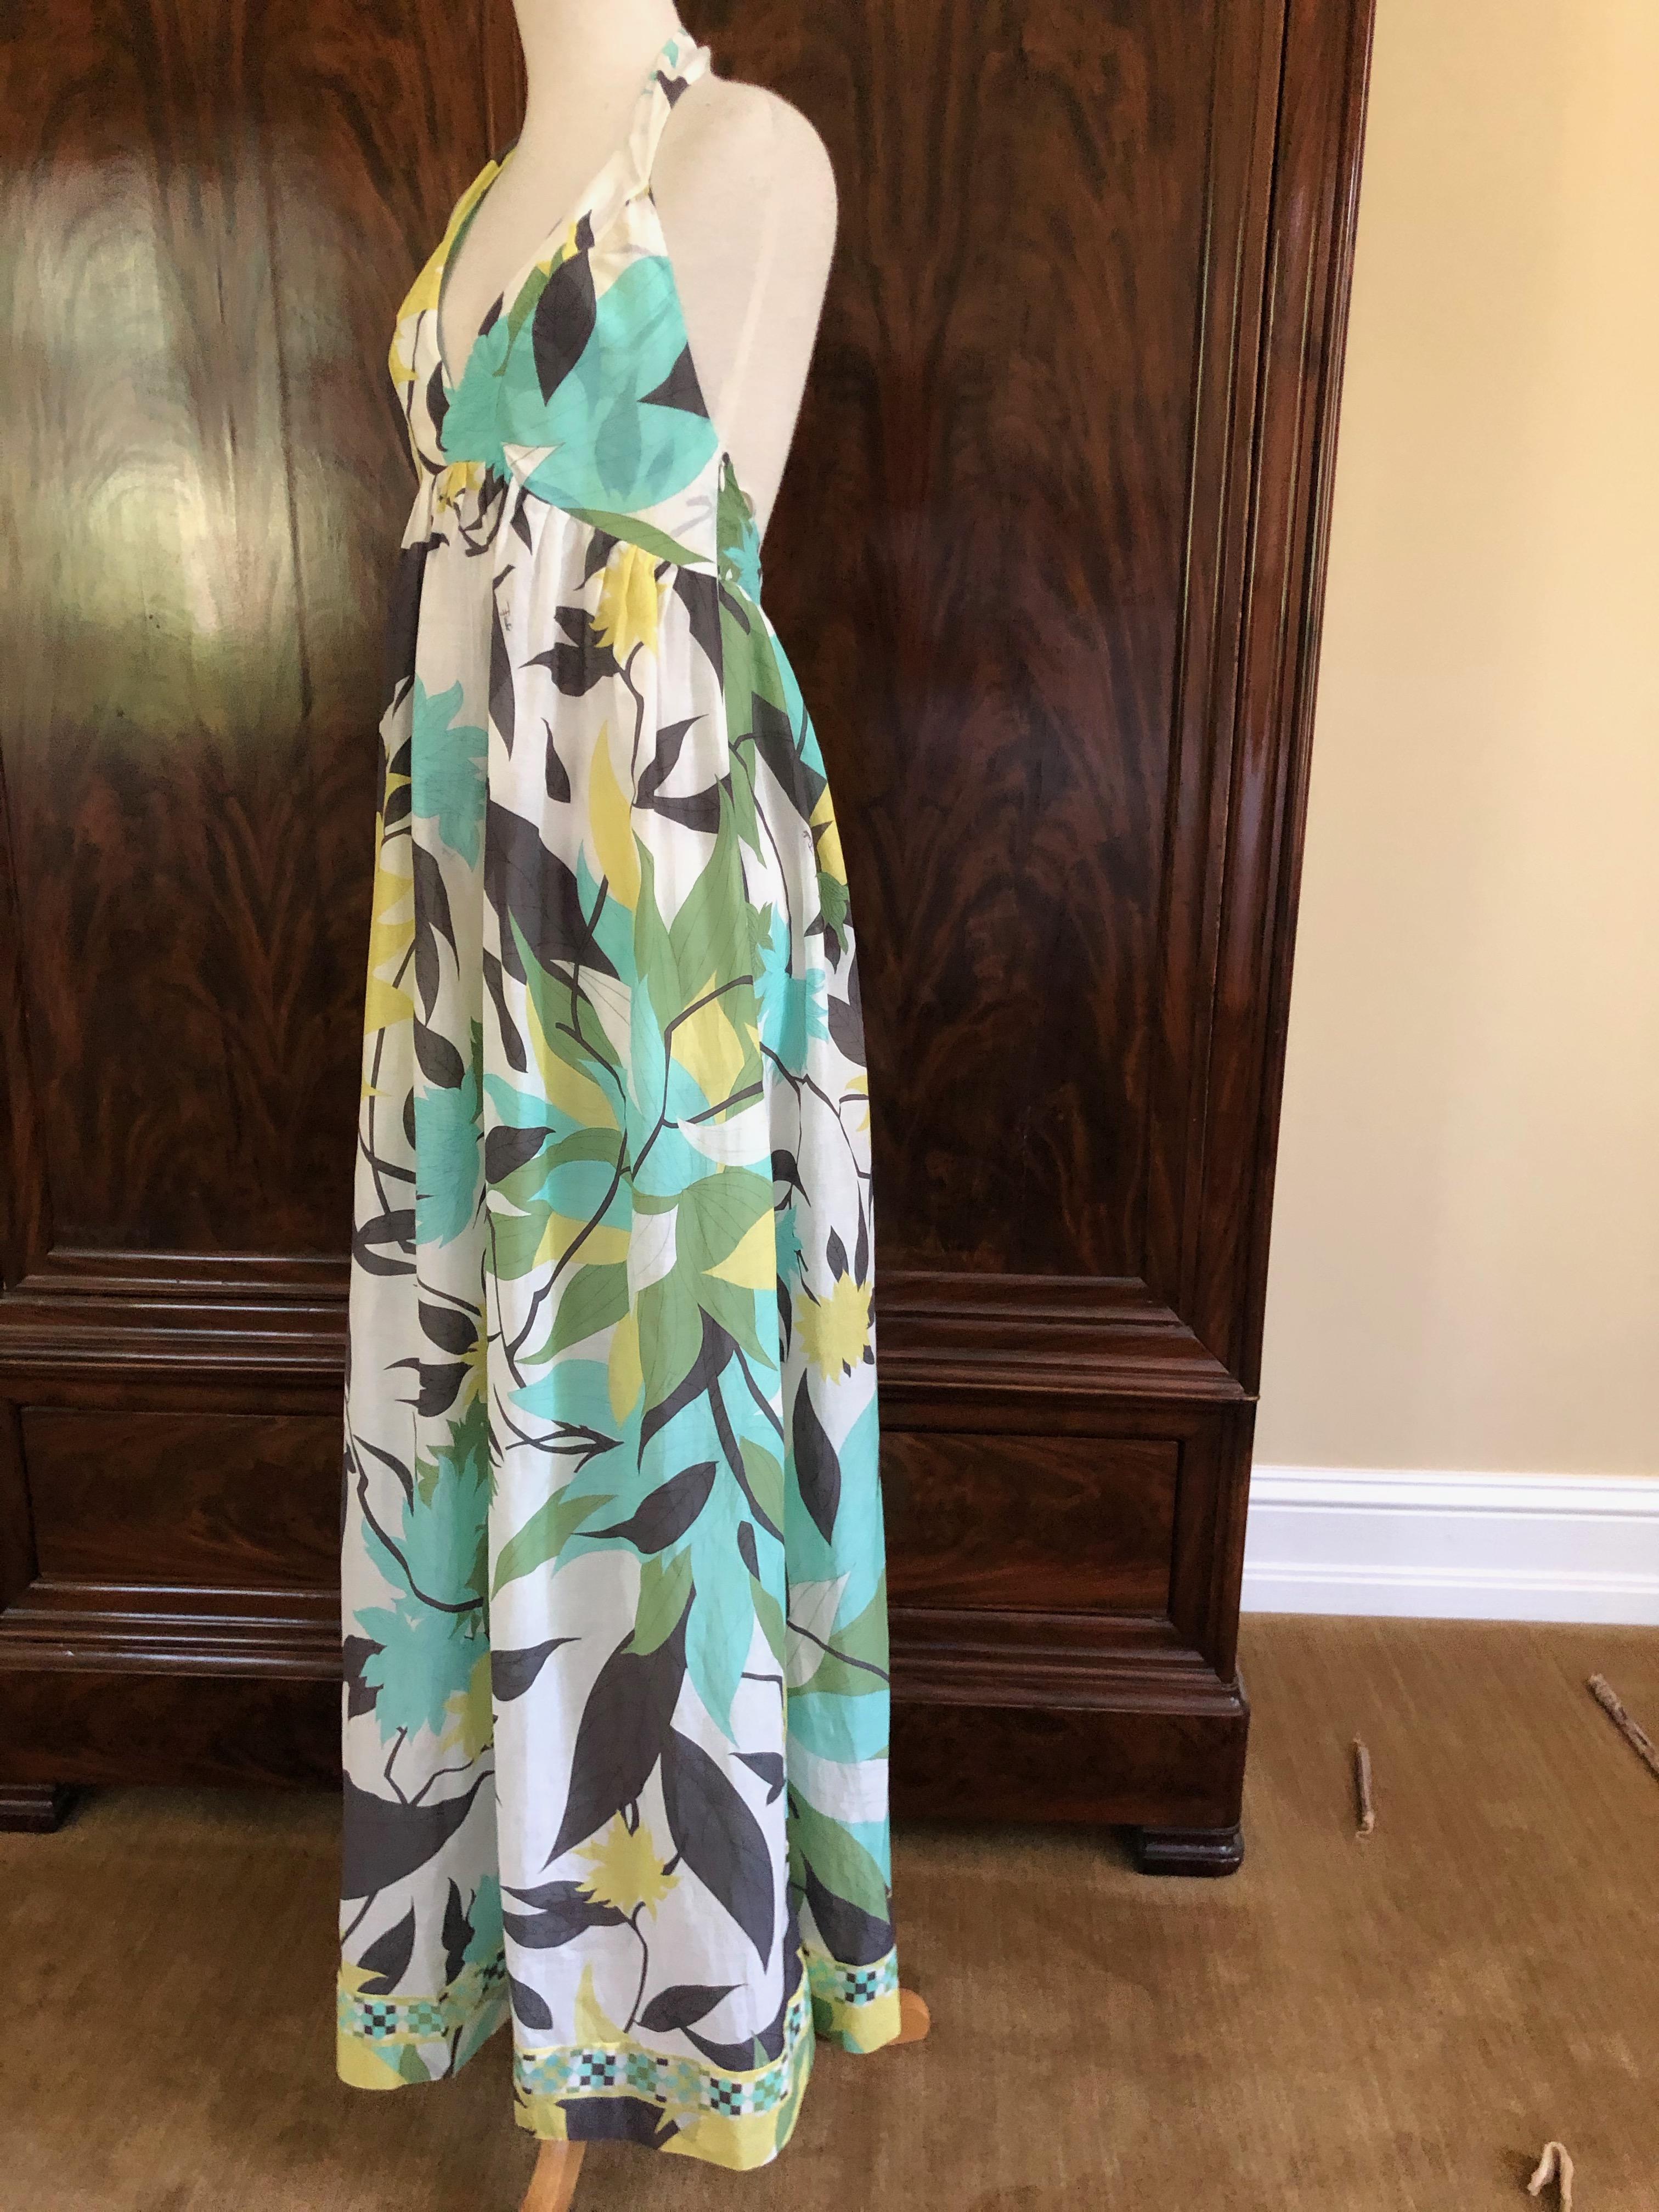 Emilio Pucci Cotton & Silk Halter Style Dress or Beach Cover Up In New Condition For Sale In Cloverdale, CA